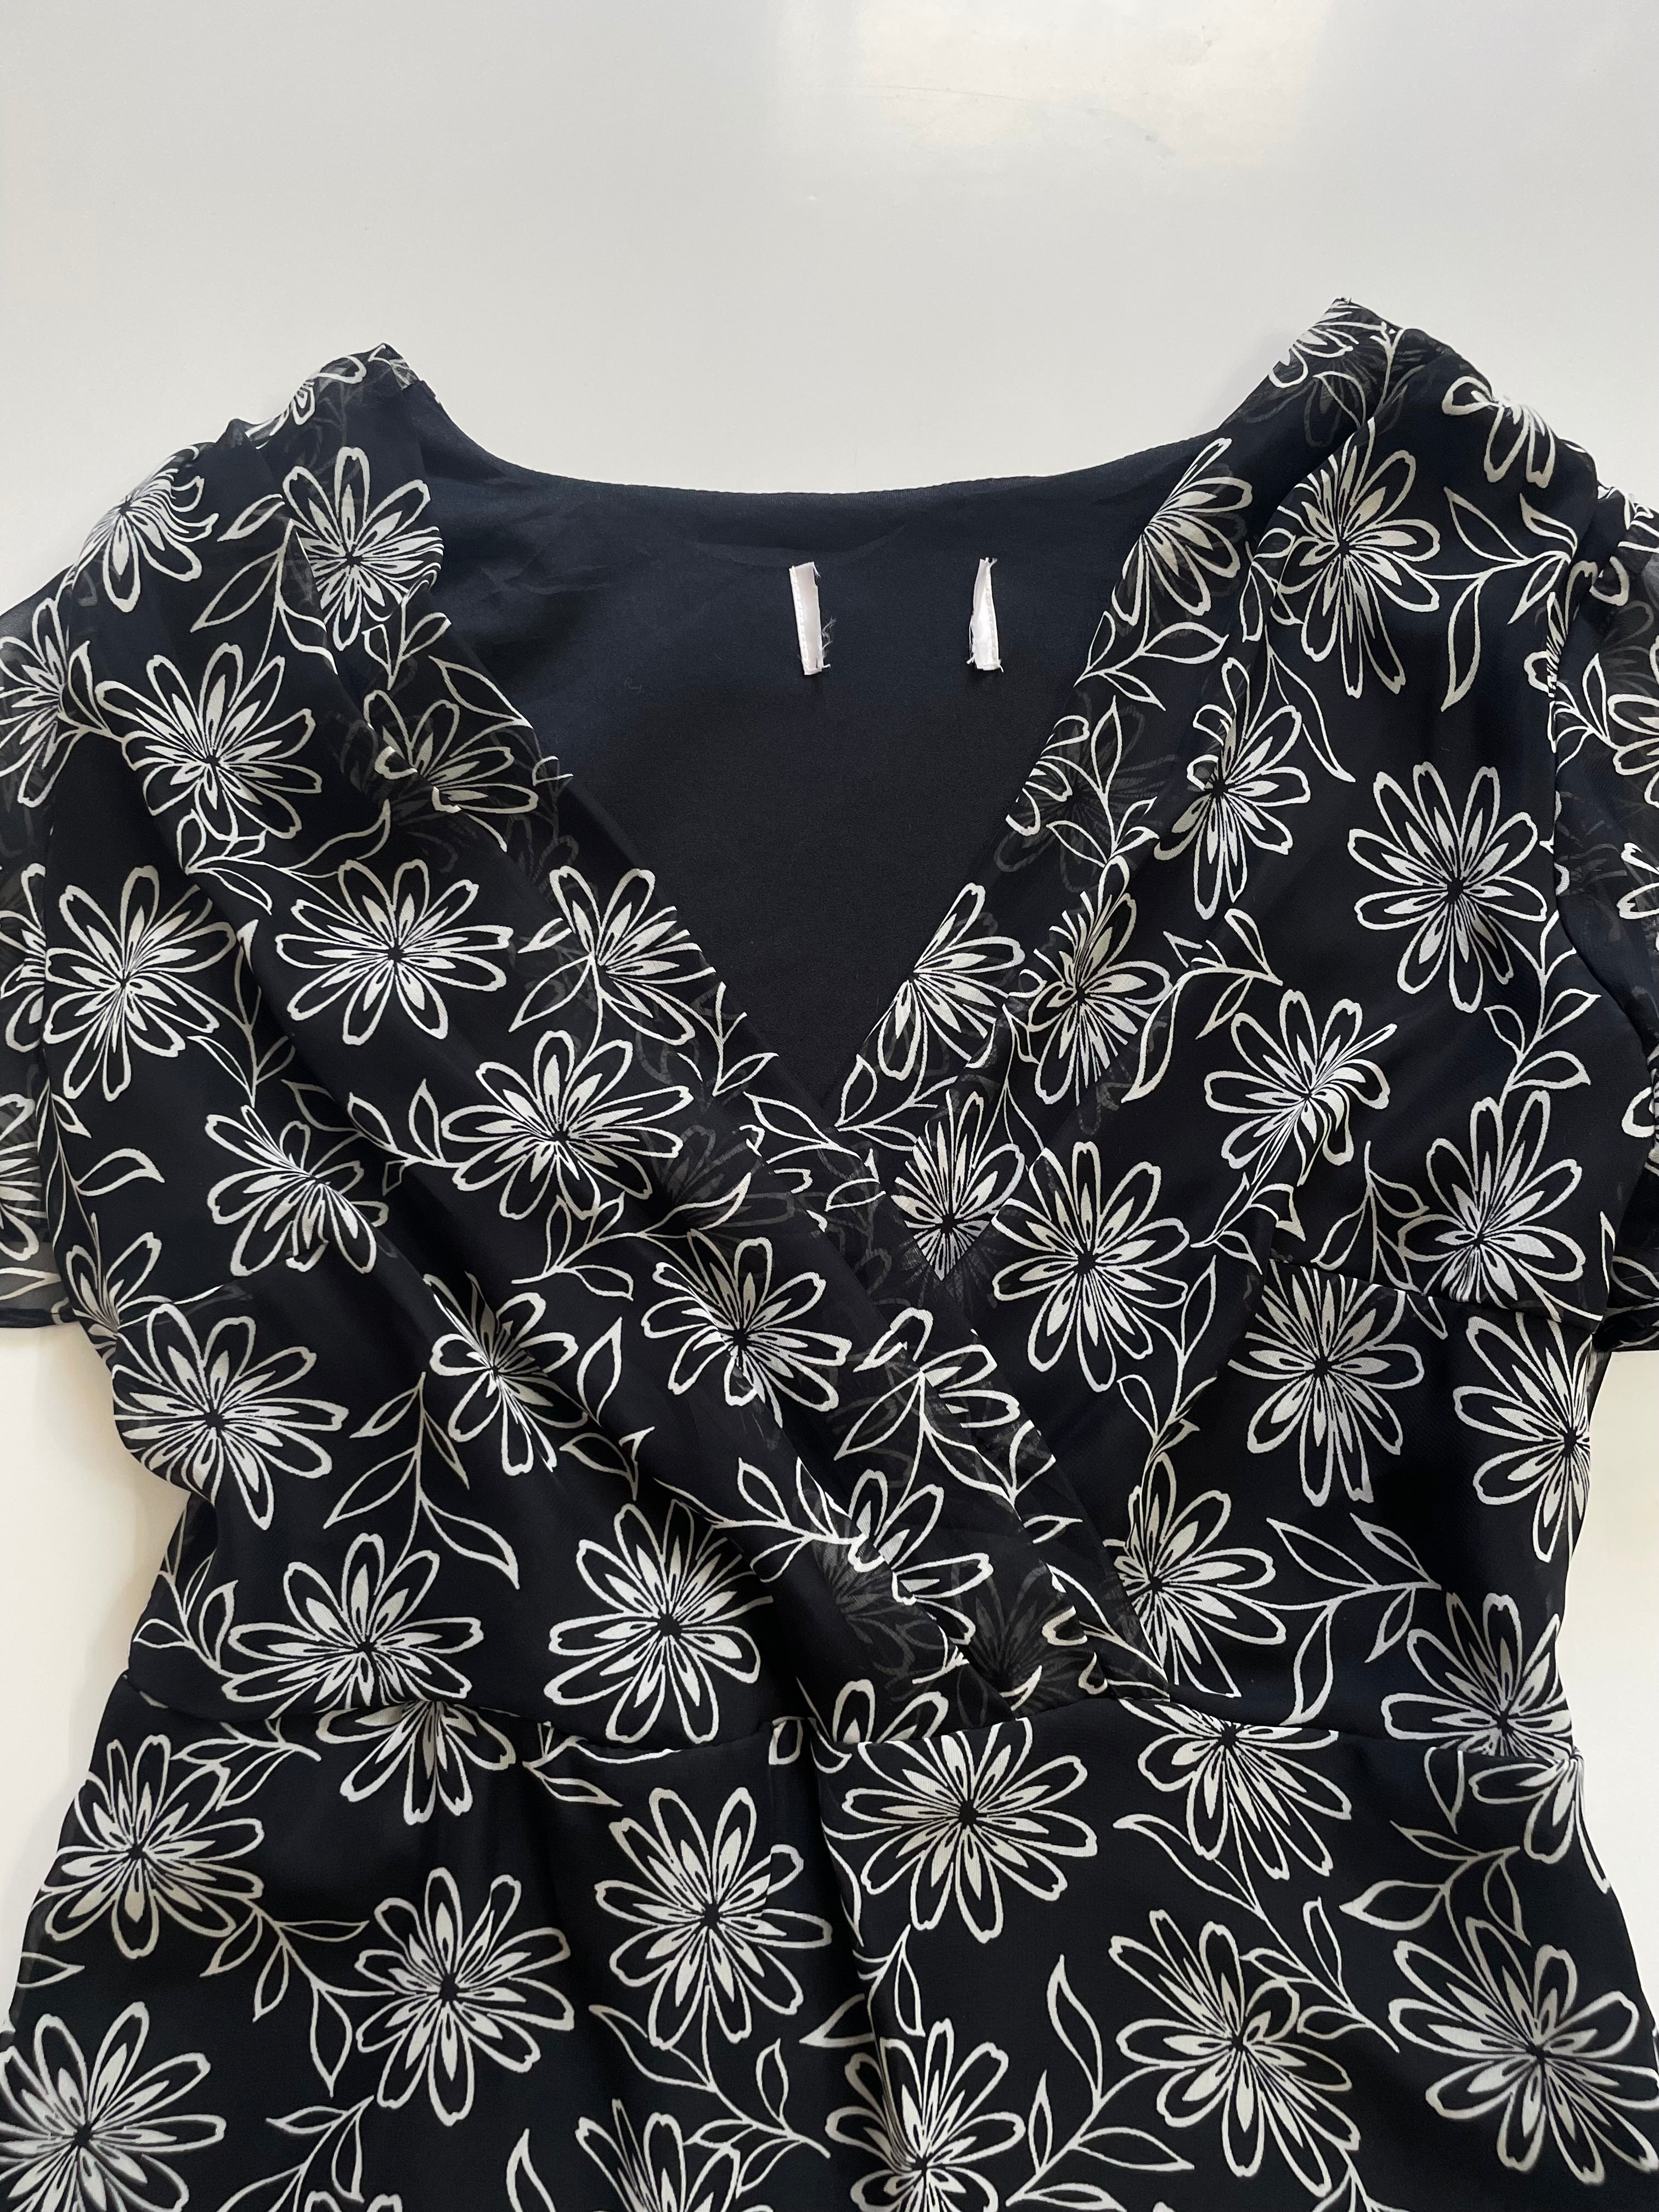 B&W FLORAL TOP - BUST 42